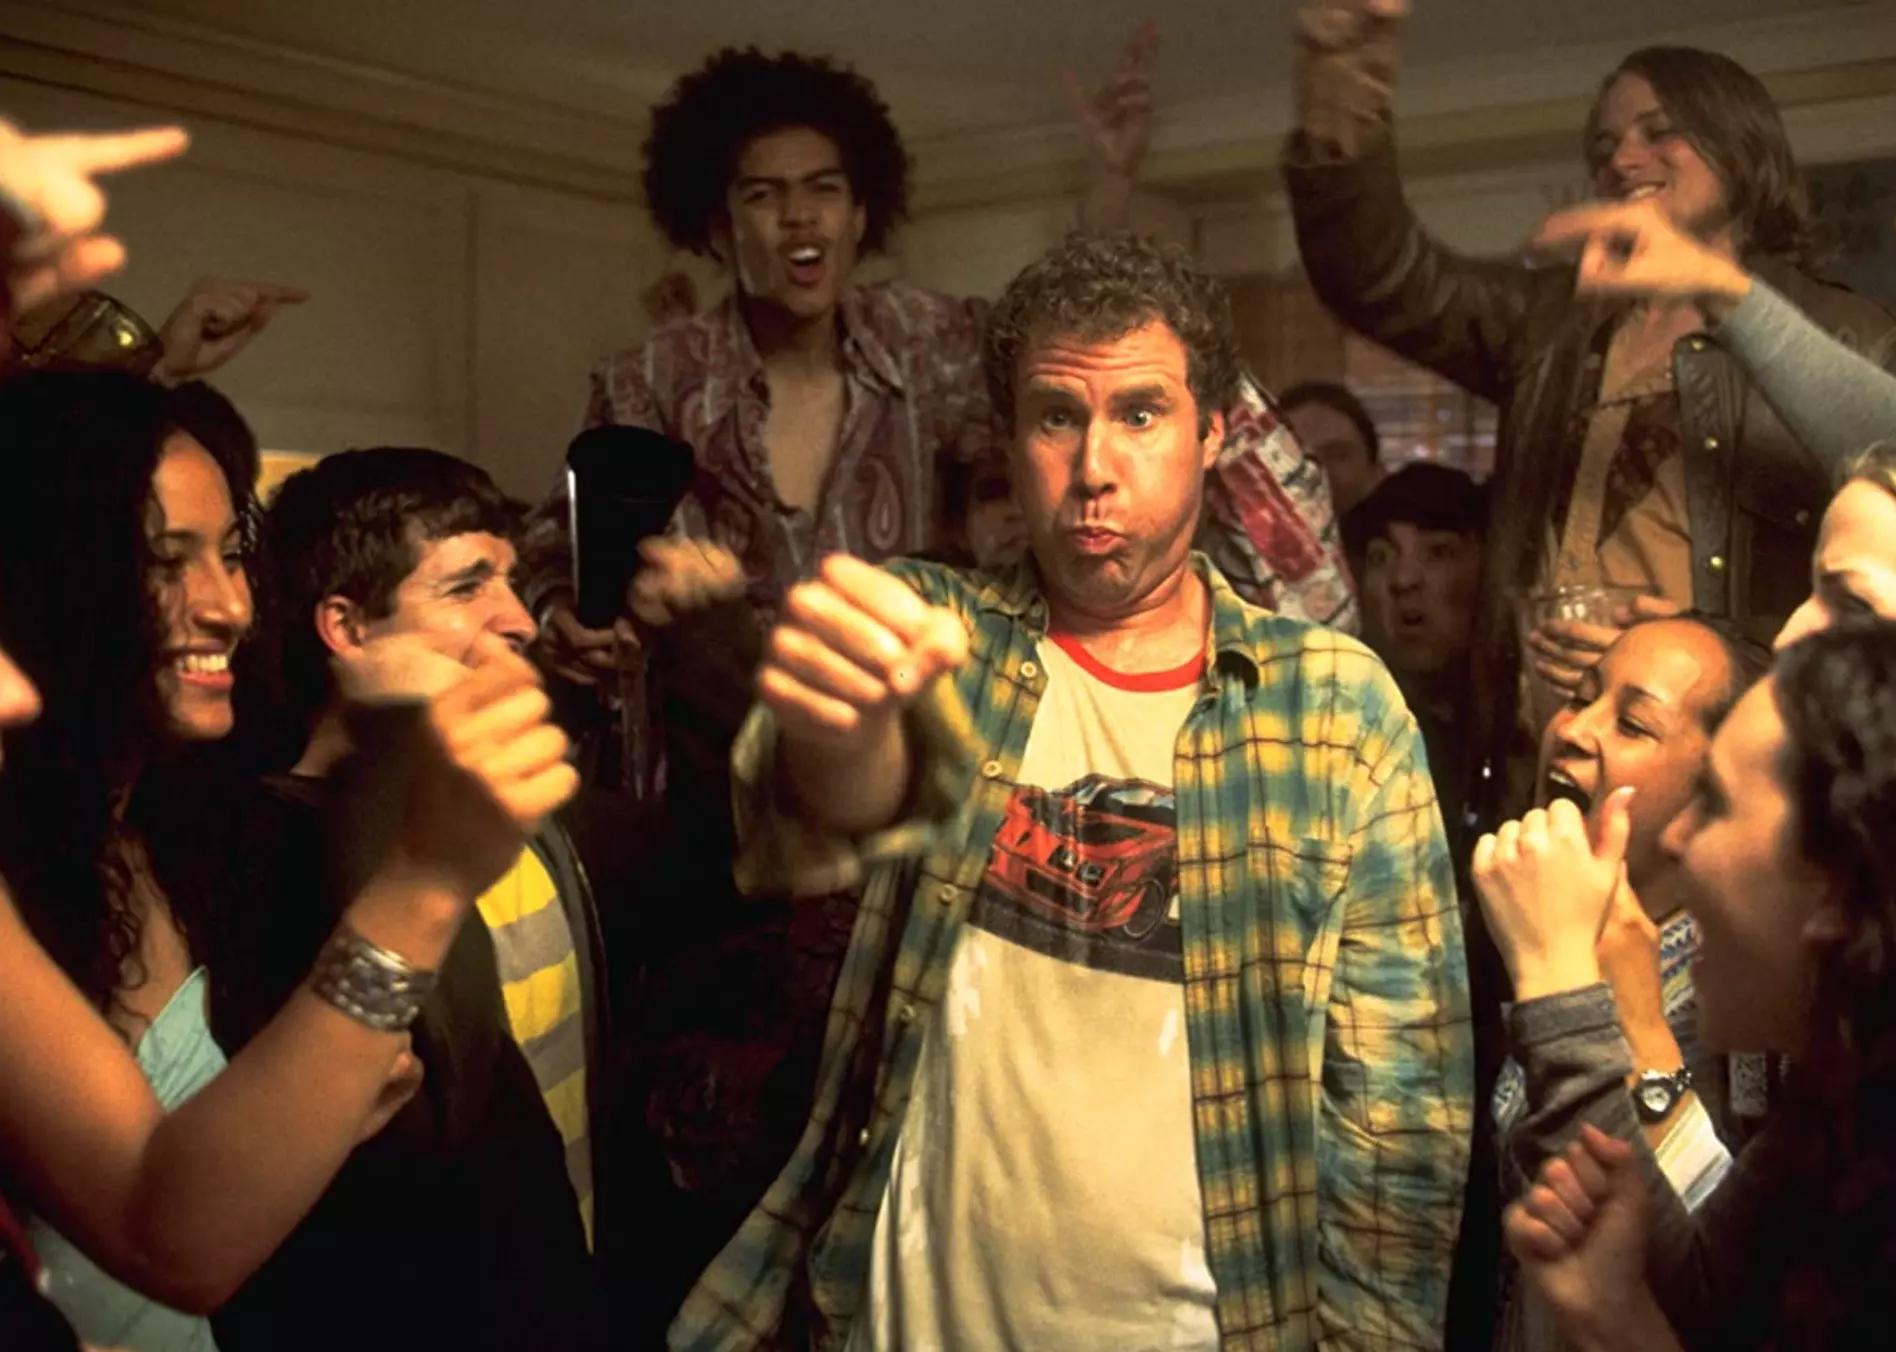 Actor Will Ferrell at a college party in the movie 'Old School.'